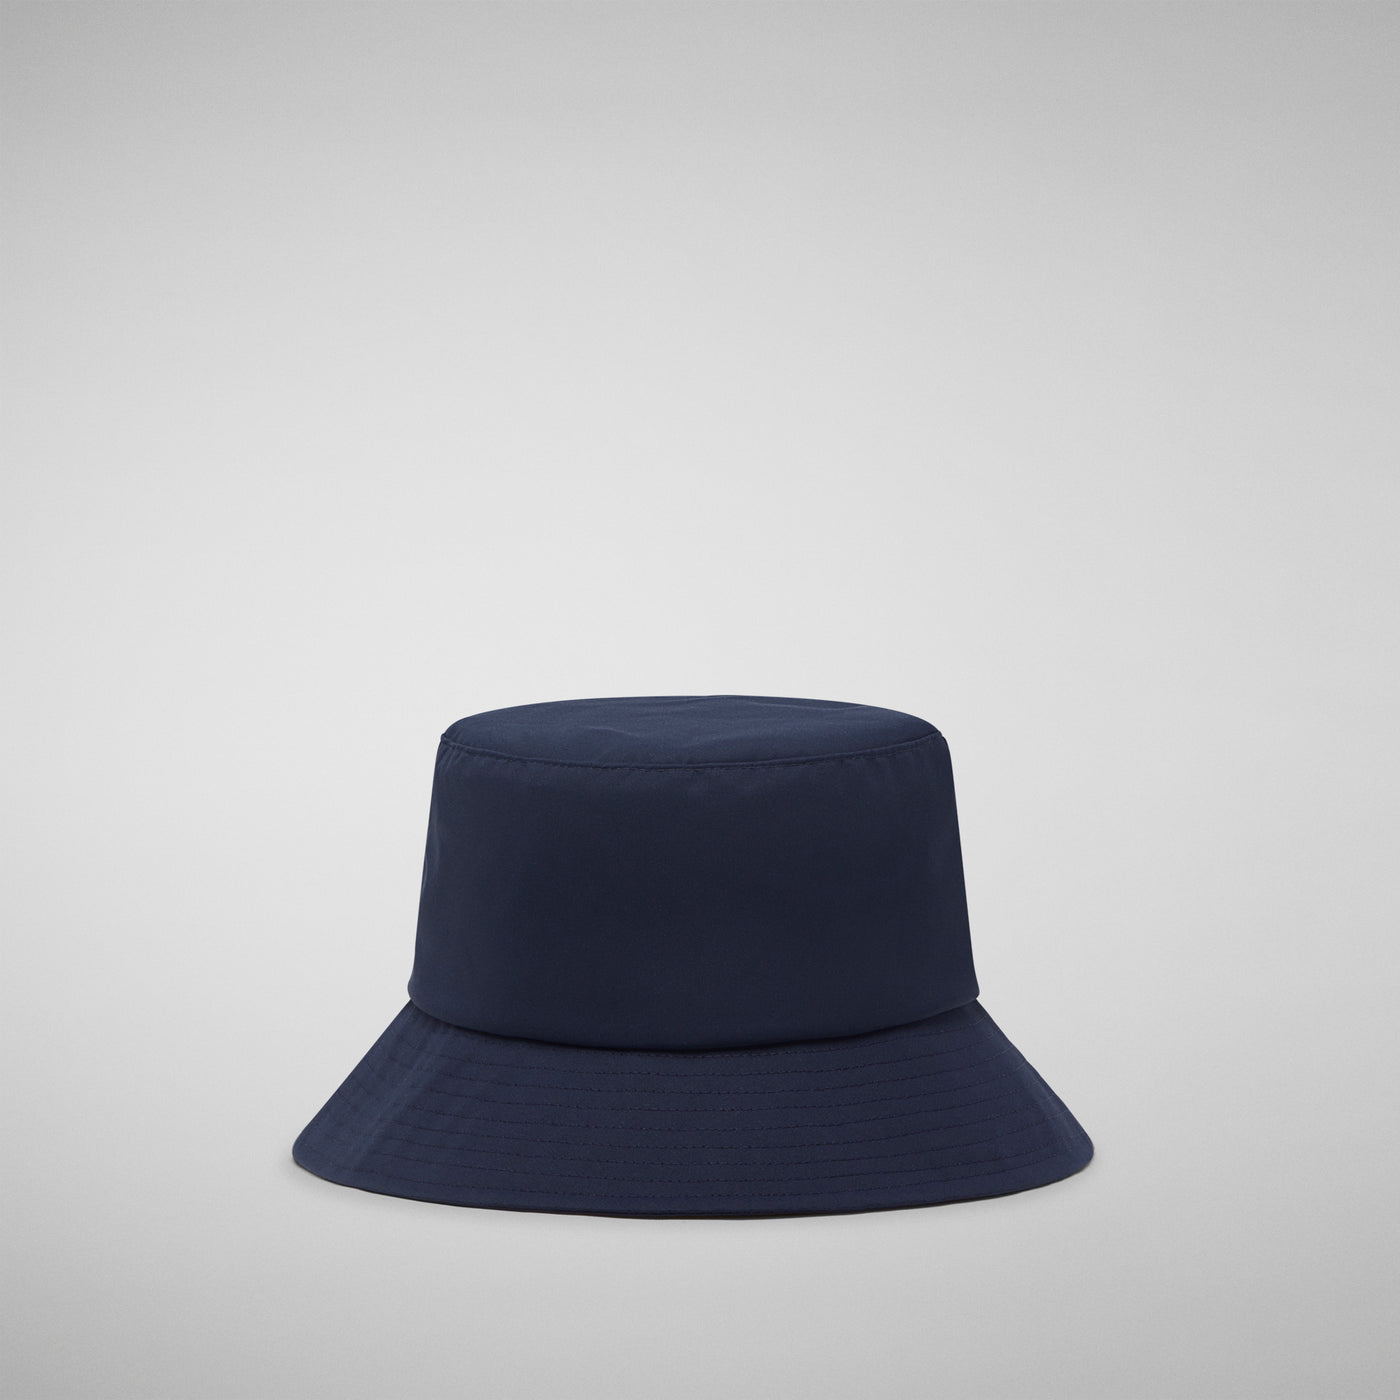 Product Back View of Unisex Autumn Hat in Navy Blue